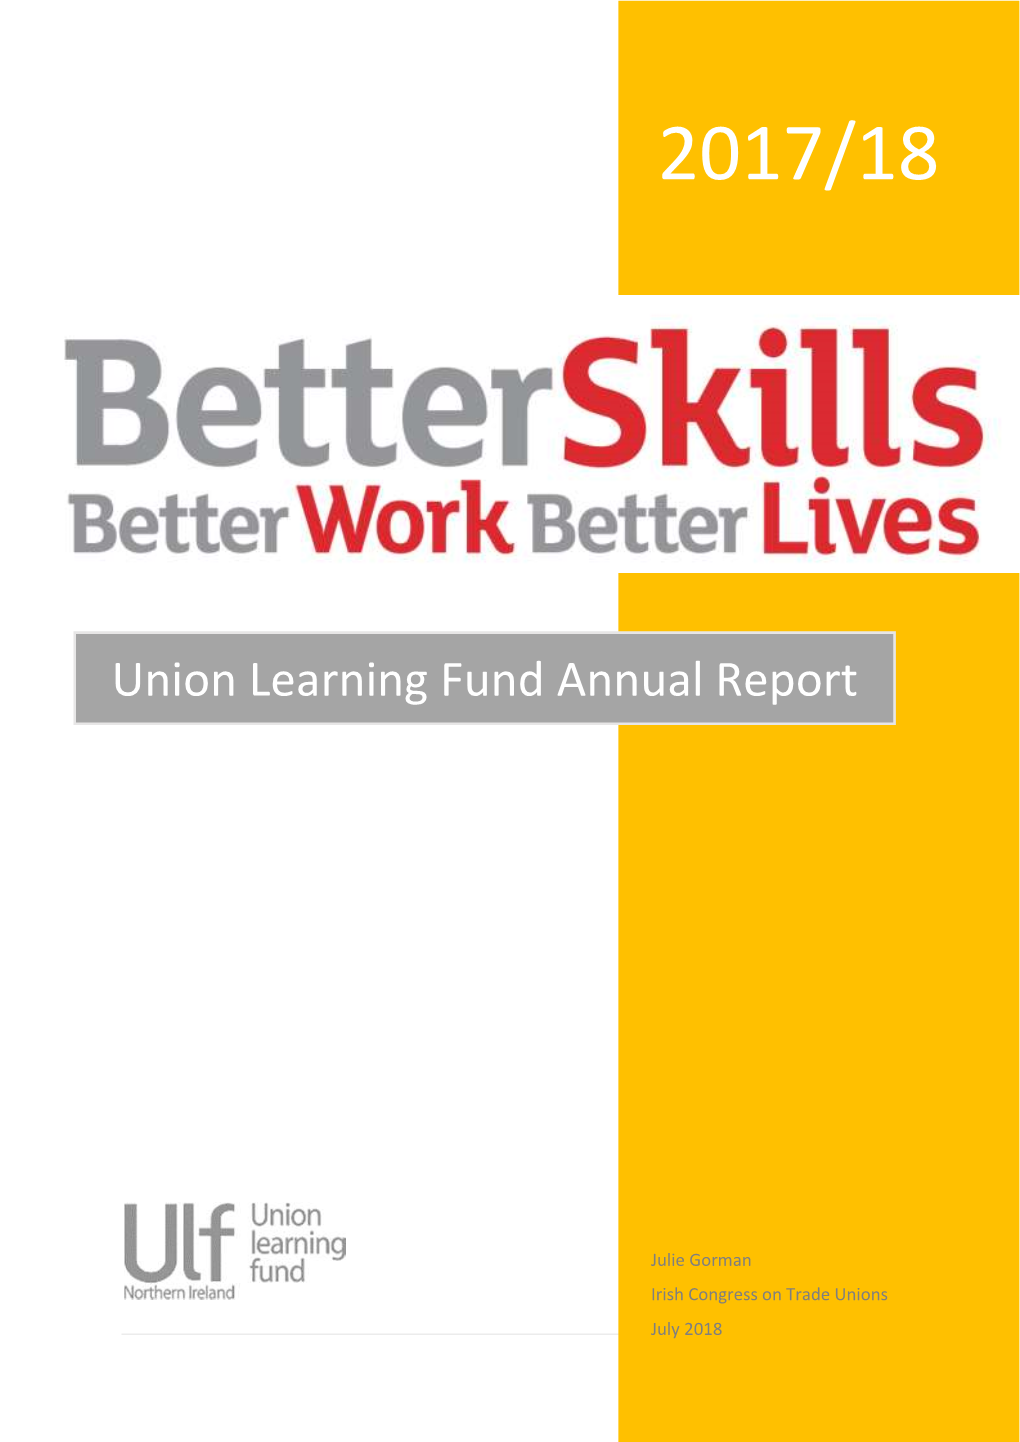 Union Learning Fund Annual Report